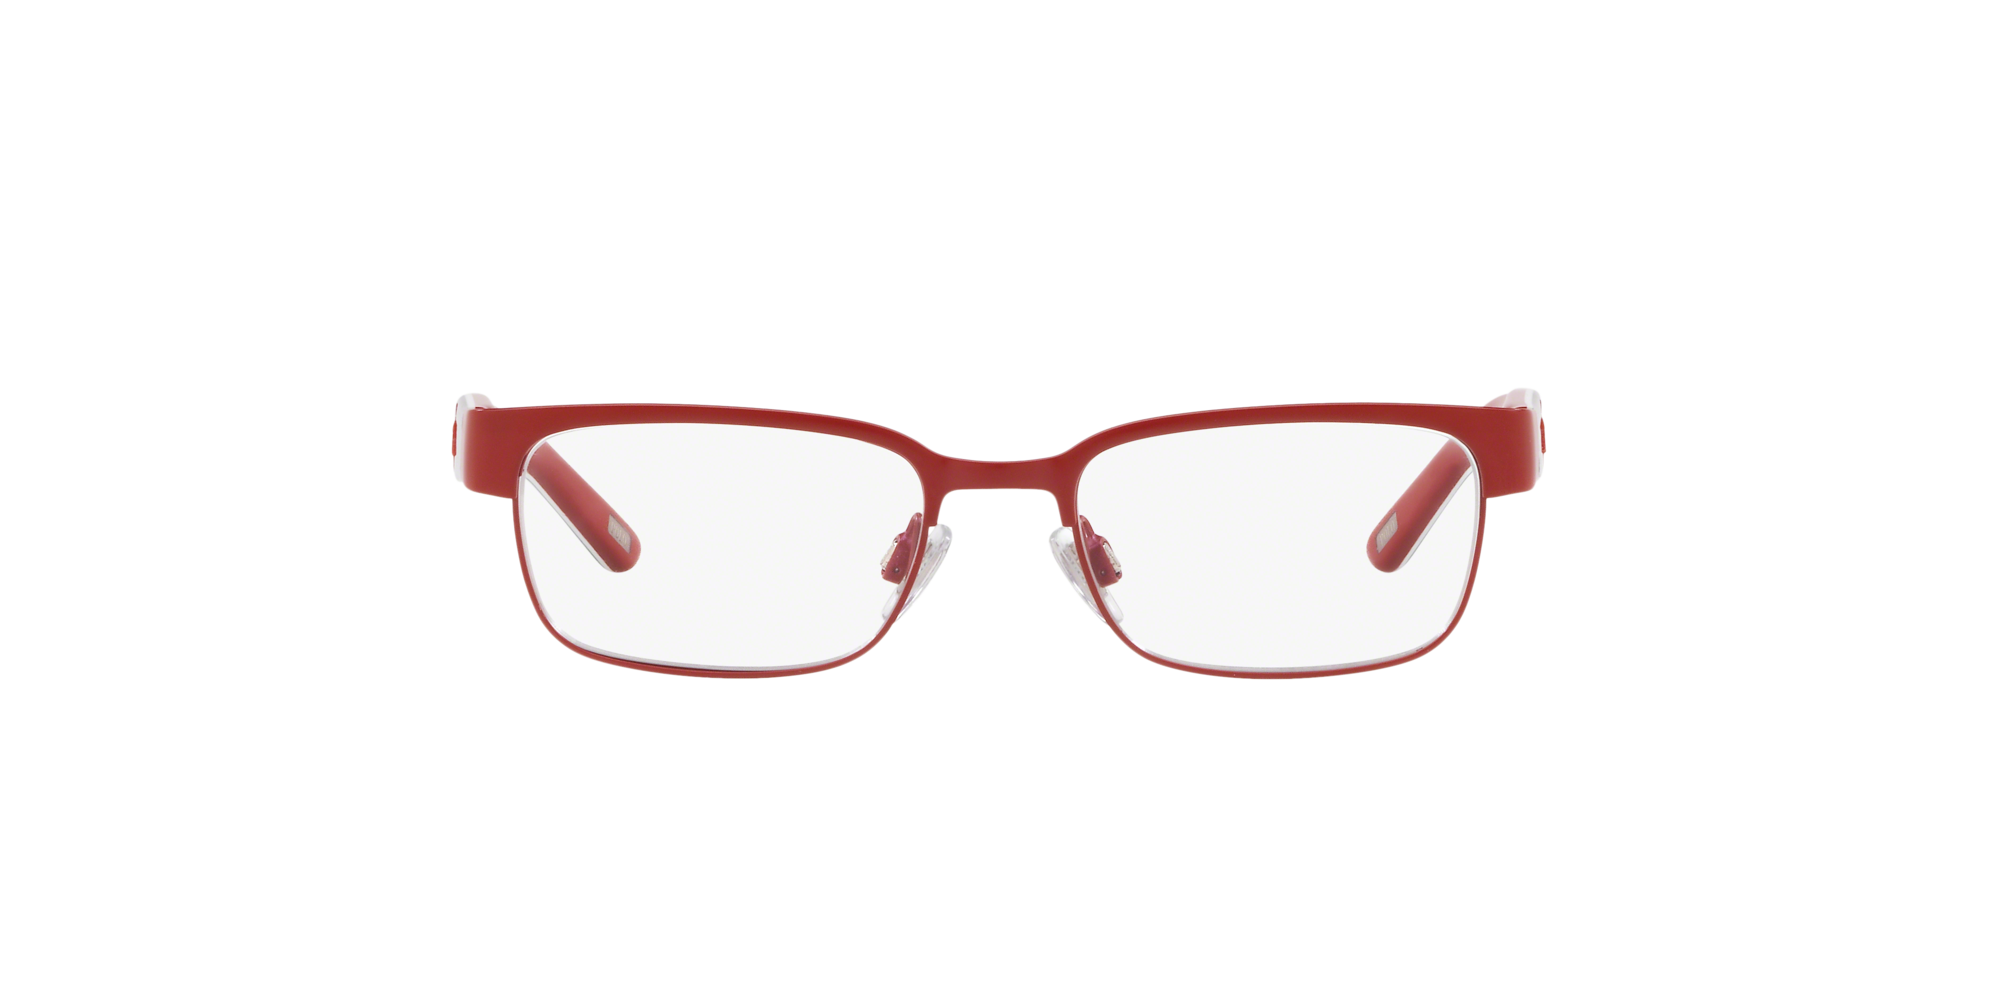  0PP8036__9369 Red Optical